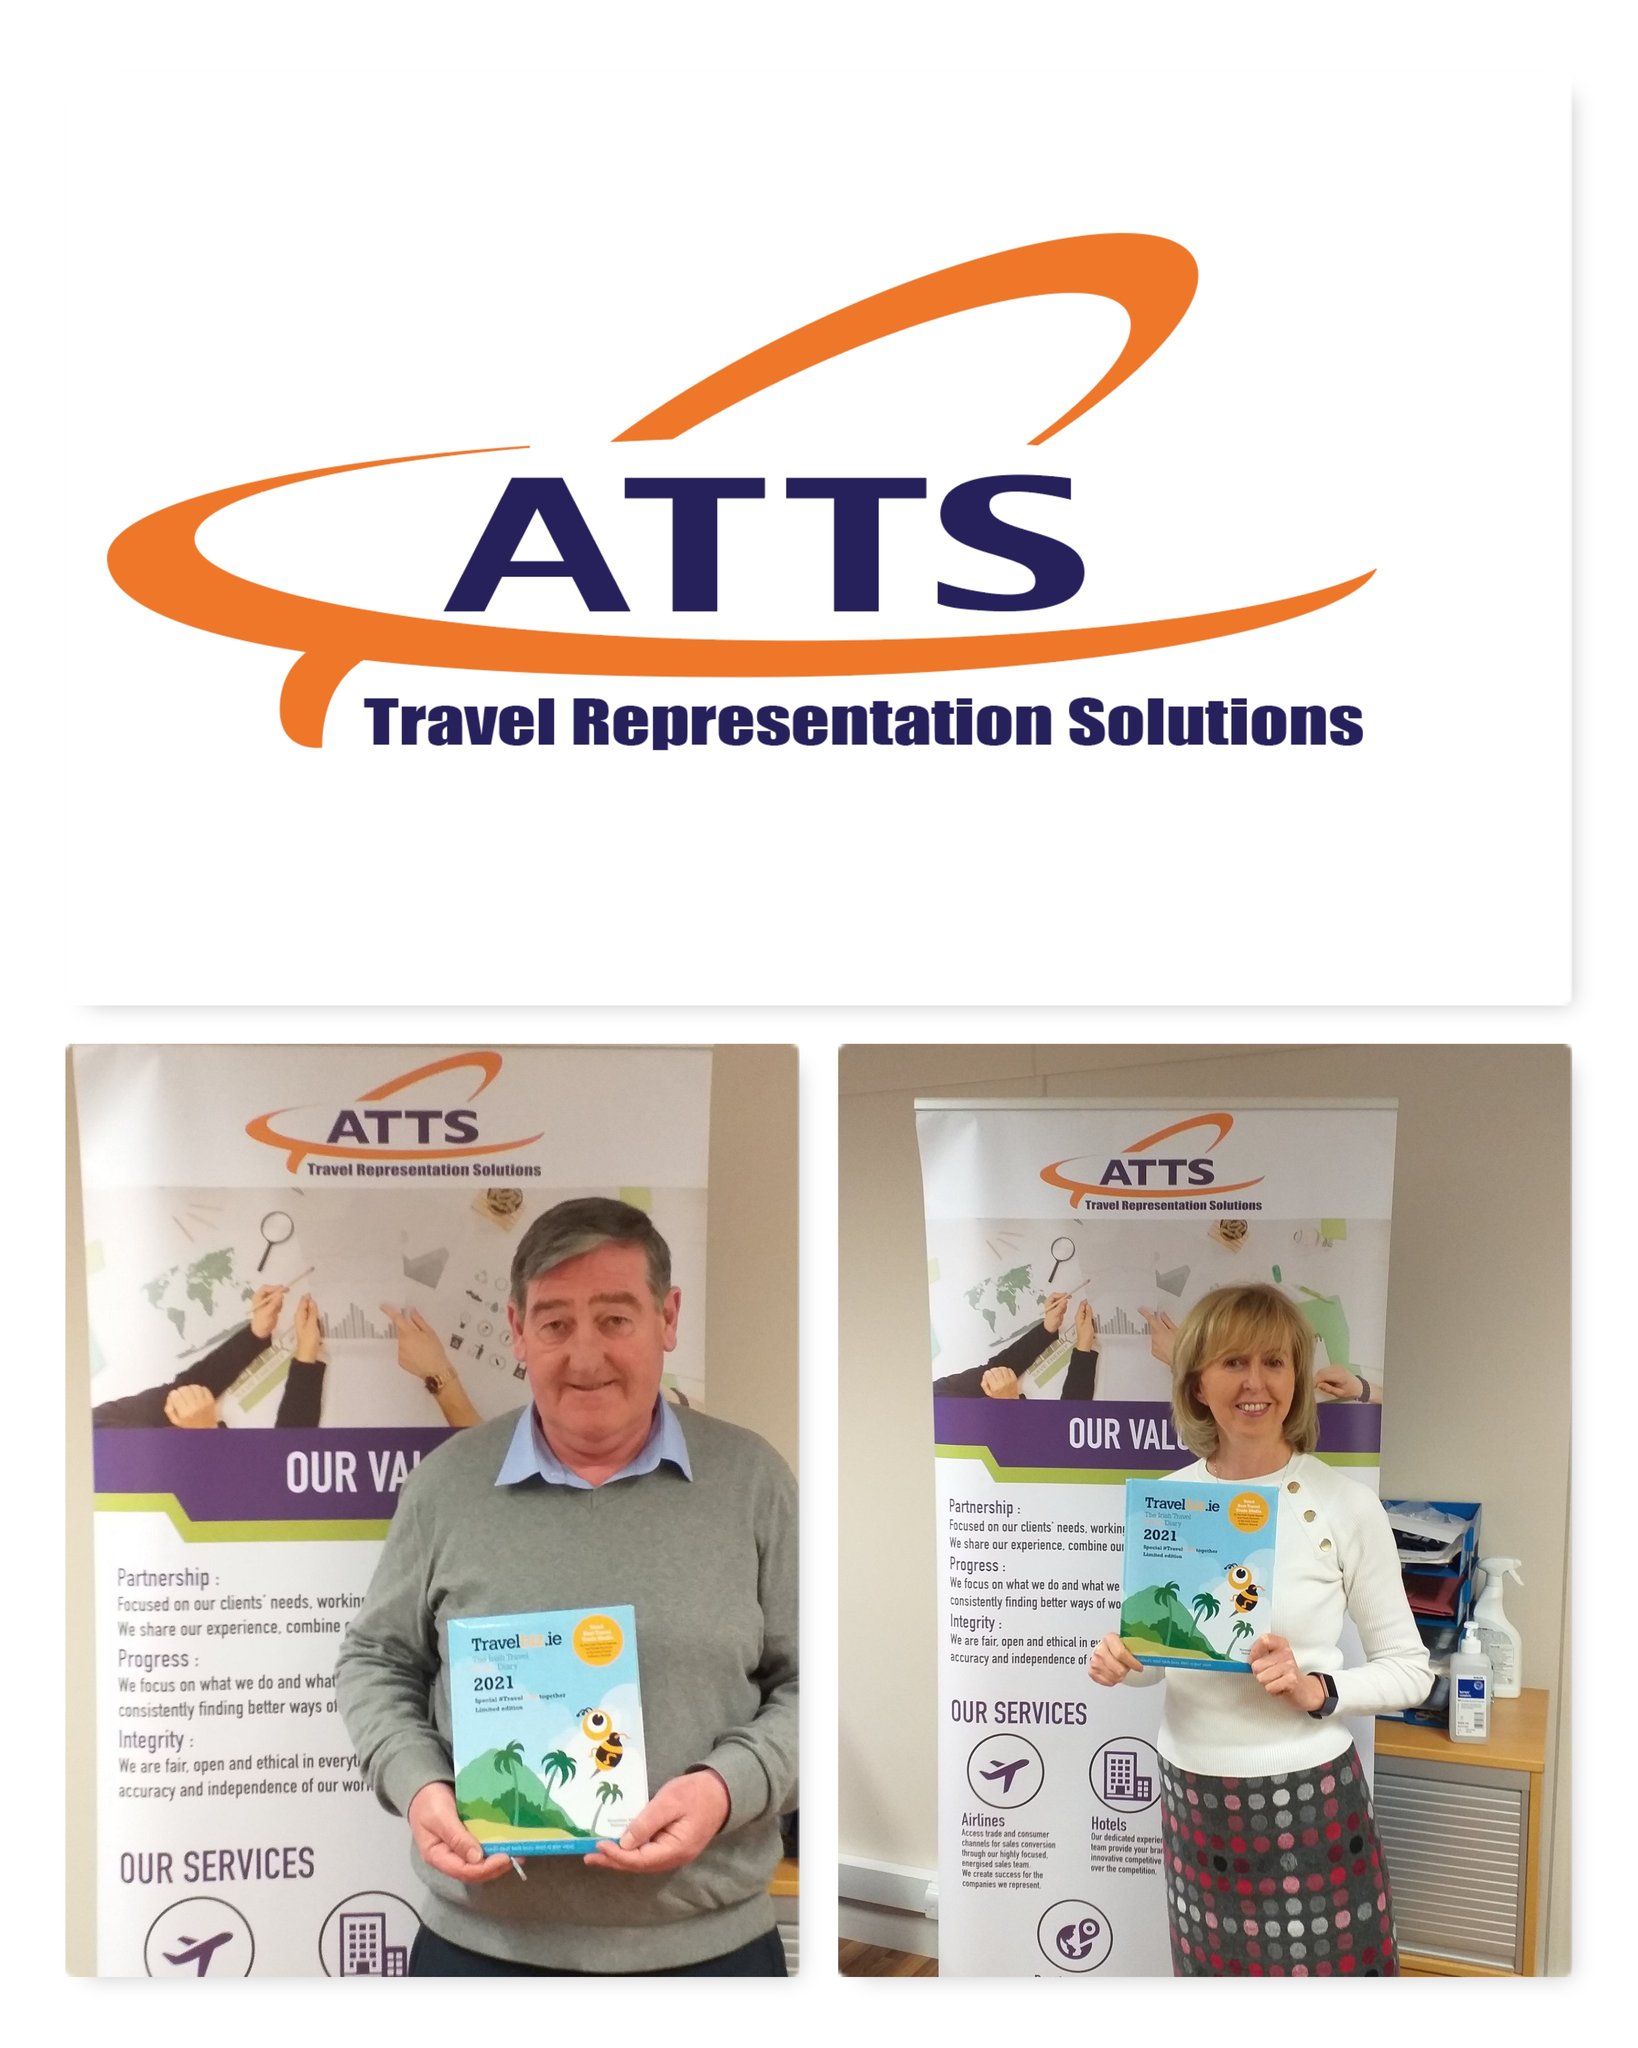 ATTS Travel Representation Solutions expands into Europe